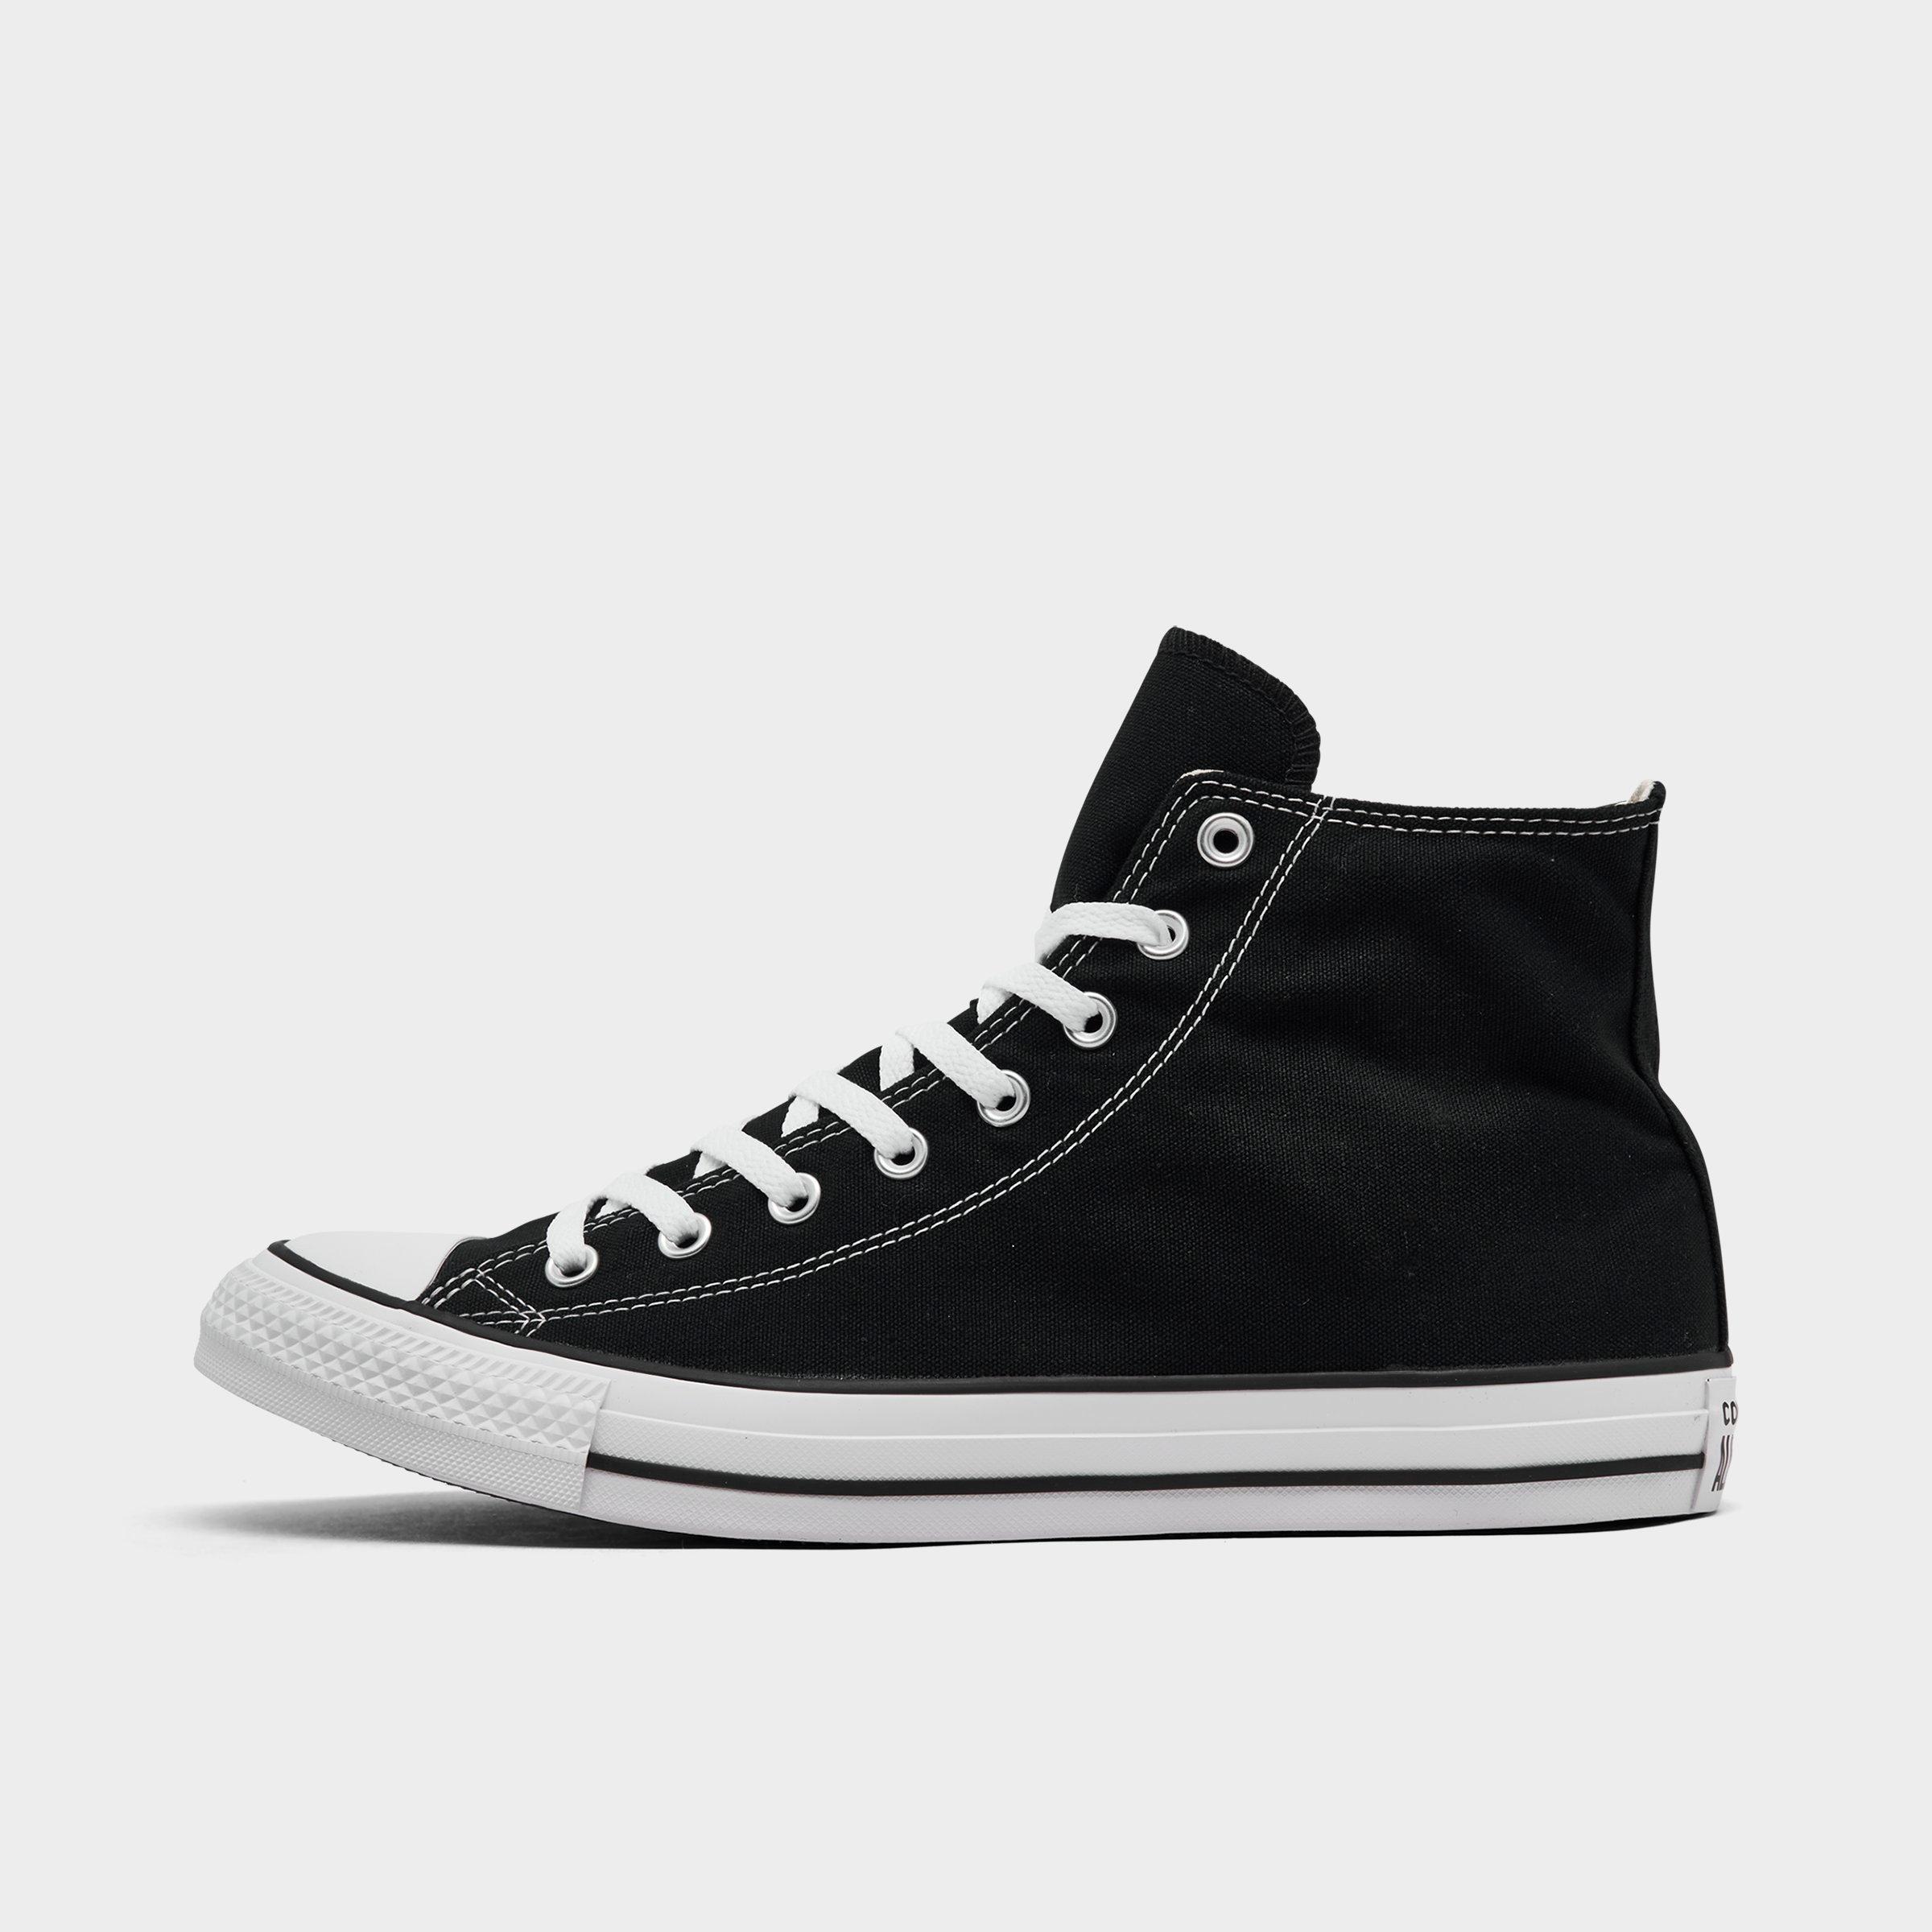 size 2 converse high tops